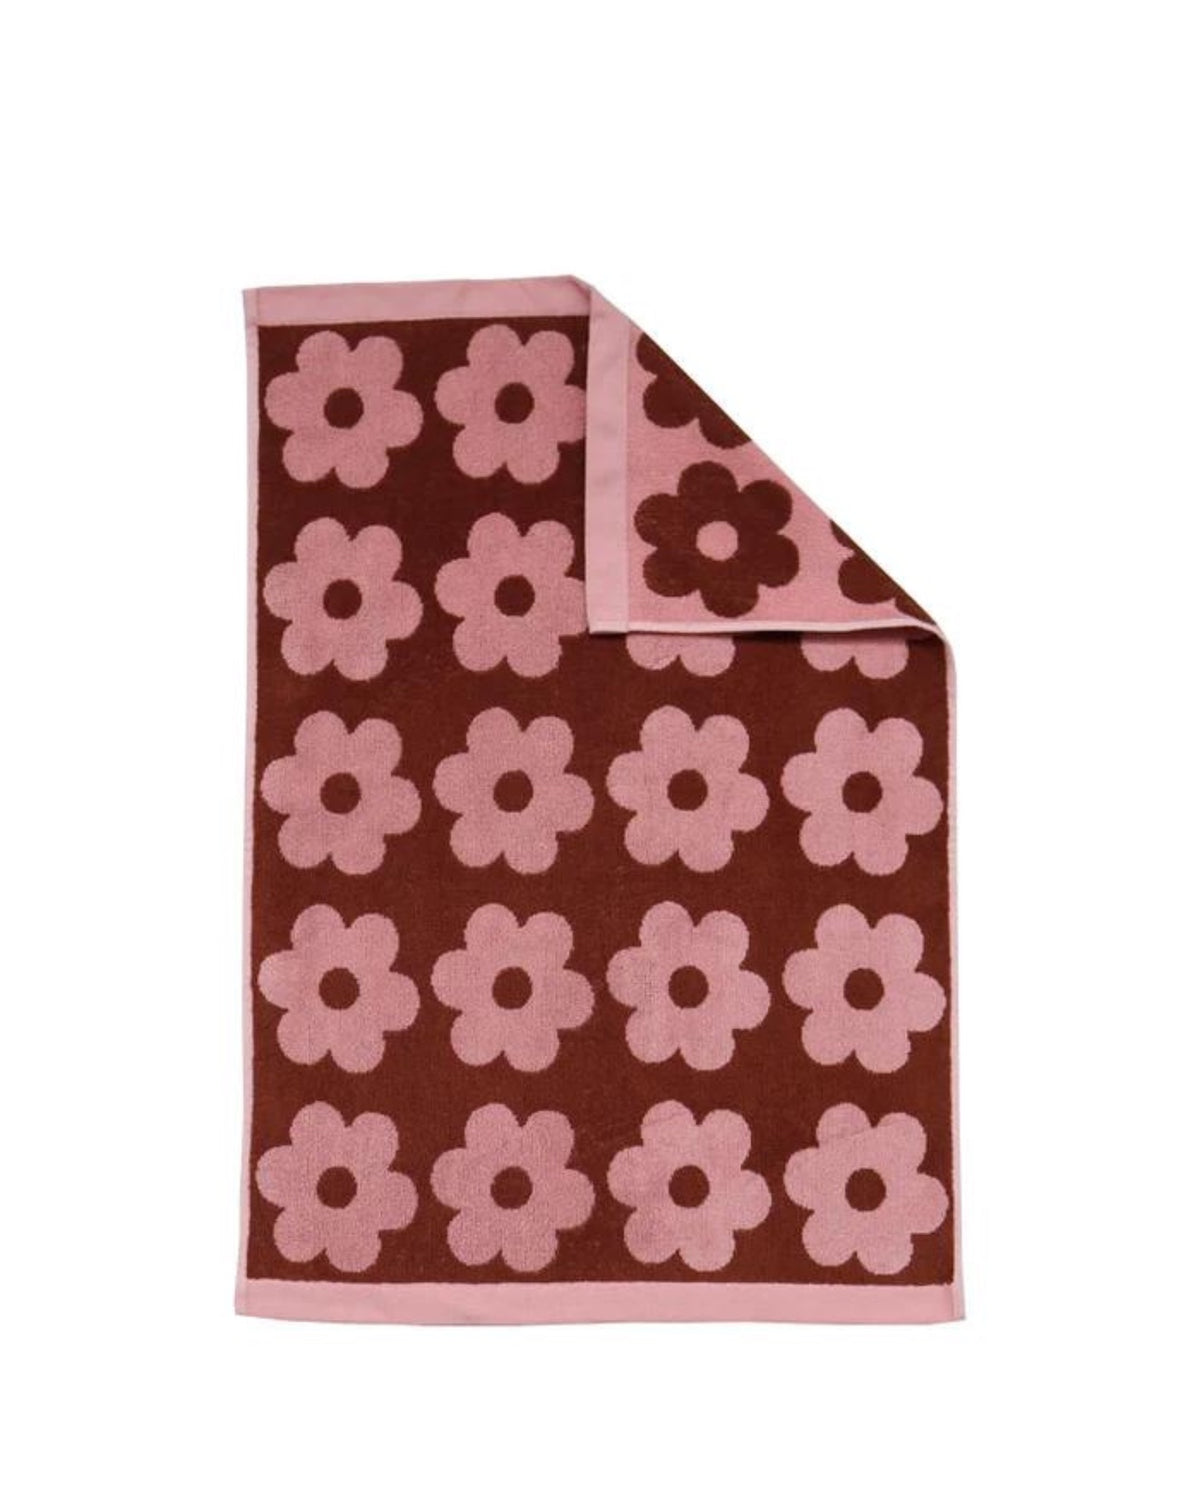 Enjoy using this ultra-plush hand towel made from 100% organic cotton. The chocolate and peony colour combination is contemporary and the flower graphic will bring fun into any bathroom. Super absorbent and luxuriously soft to the touch. DETAILS •	100% Organic Cotton •	500 GSM for softness and absorbency •	70cm x 140cm •	Designed in Melbourne, made in Portugal .